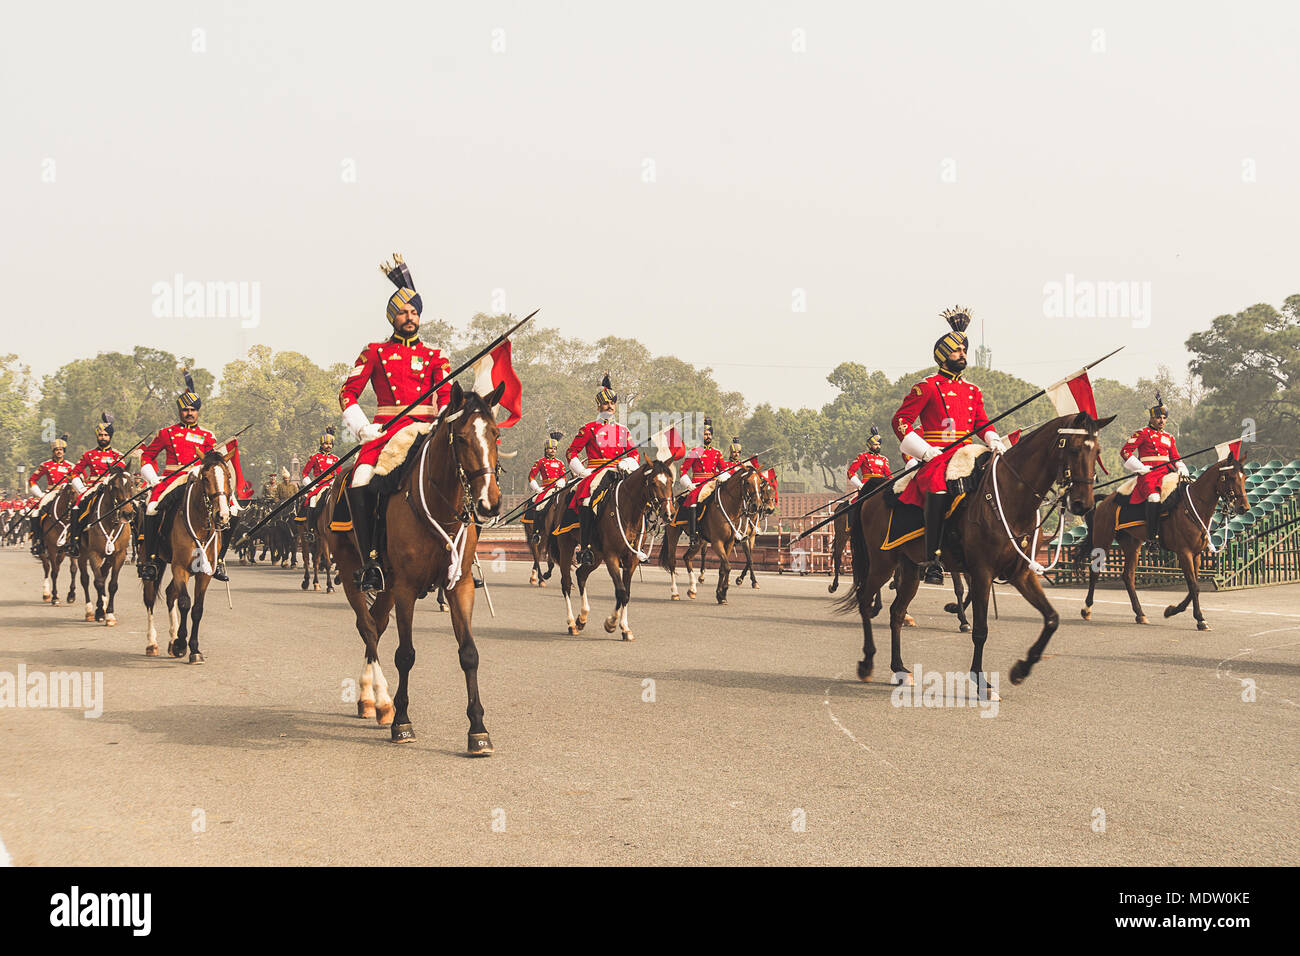 New Delhi, India, 26 January 2018: : The mounted Presidential bodyguards rehearse for the Republic Day Parade in New Delhi, India. The Horse Guards ar Stock Photo